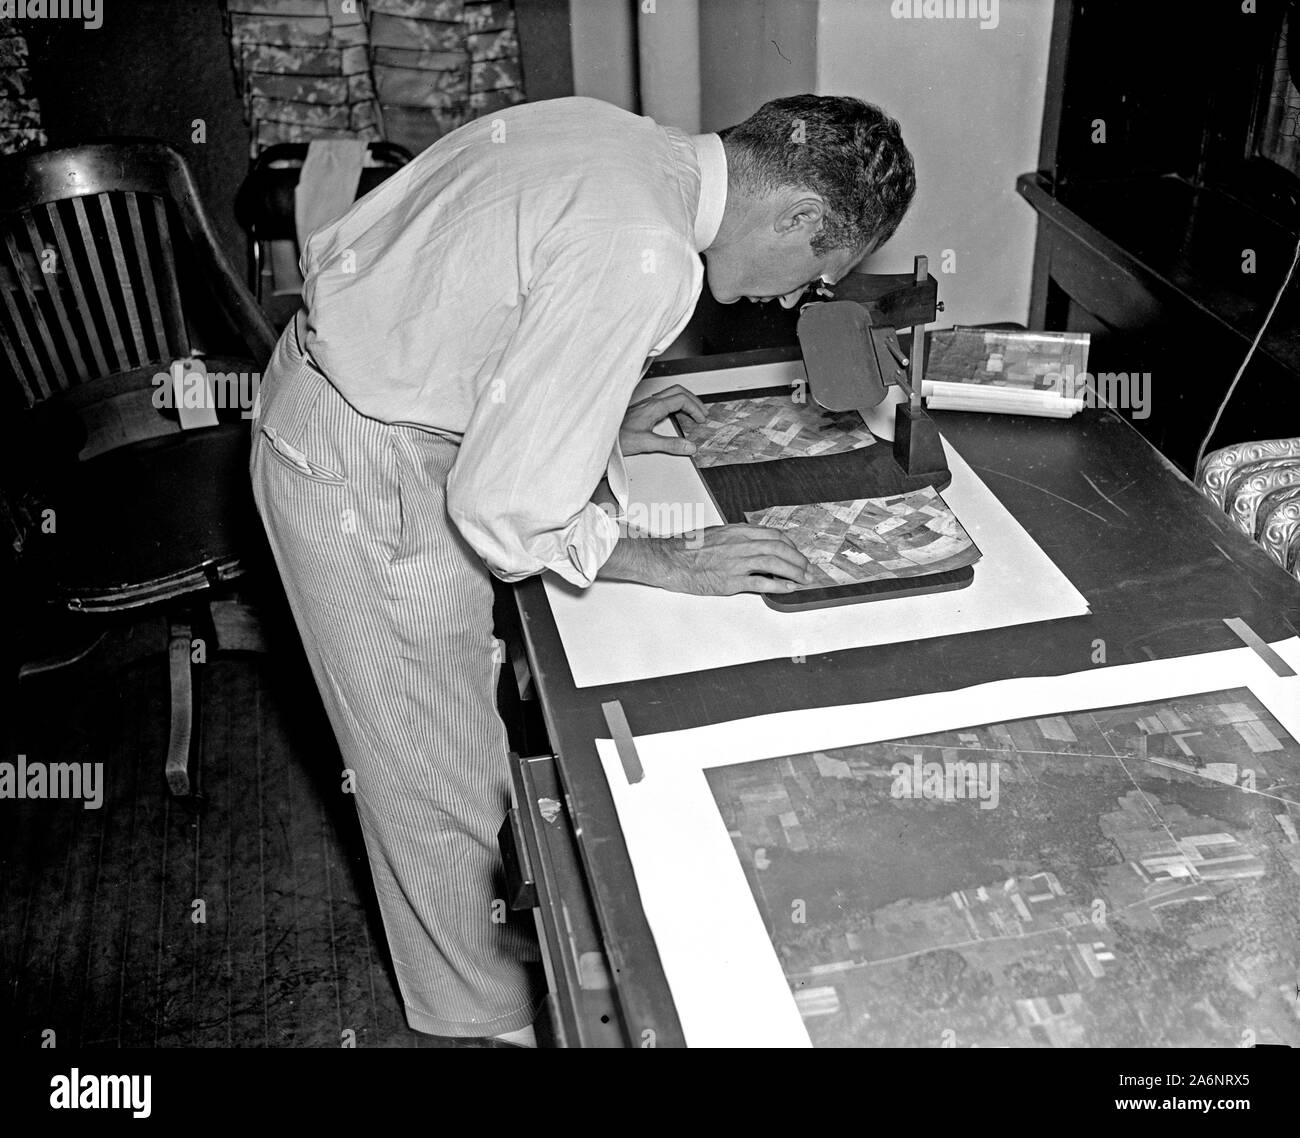 A worker is shown making a stereoscopic examination of the finished photographic prints to determine the relief or elevation of land surface for a map of the United States ca. 1937 Stock Photo